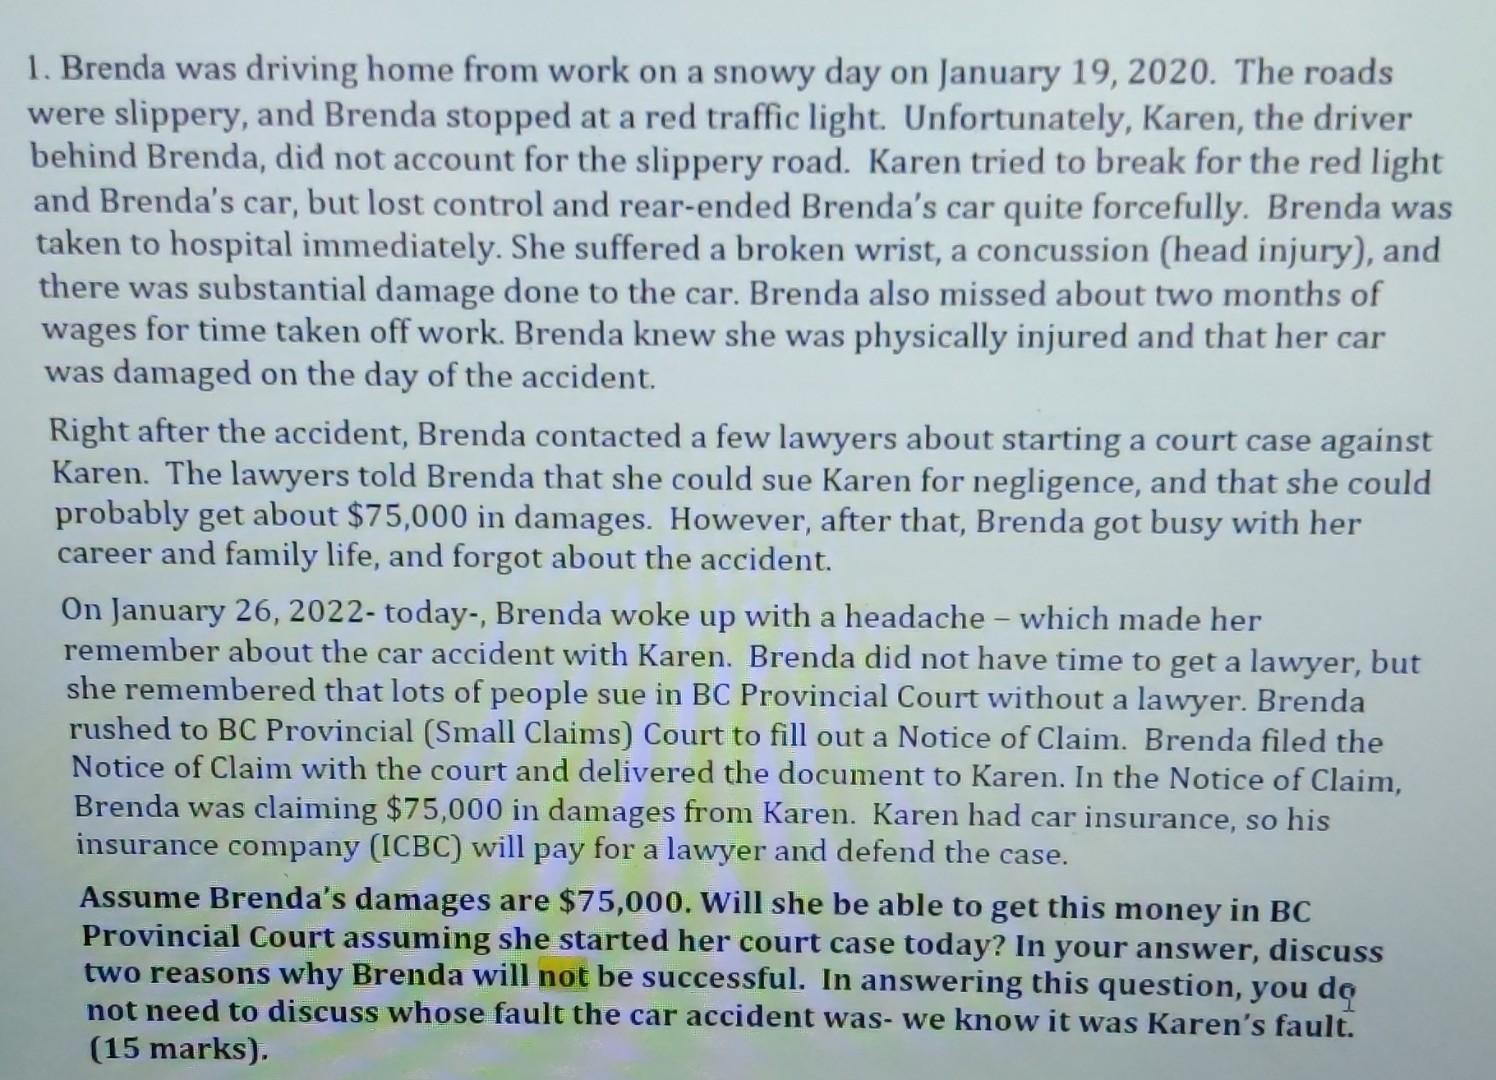 1. Brenda was driving home from work on a snowy day on January 19, 2020. The roads were slippery, and Brenda stopped at a red